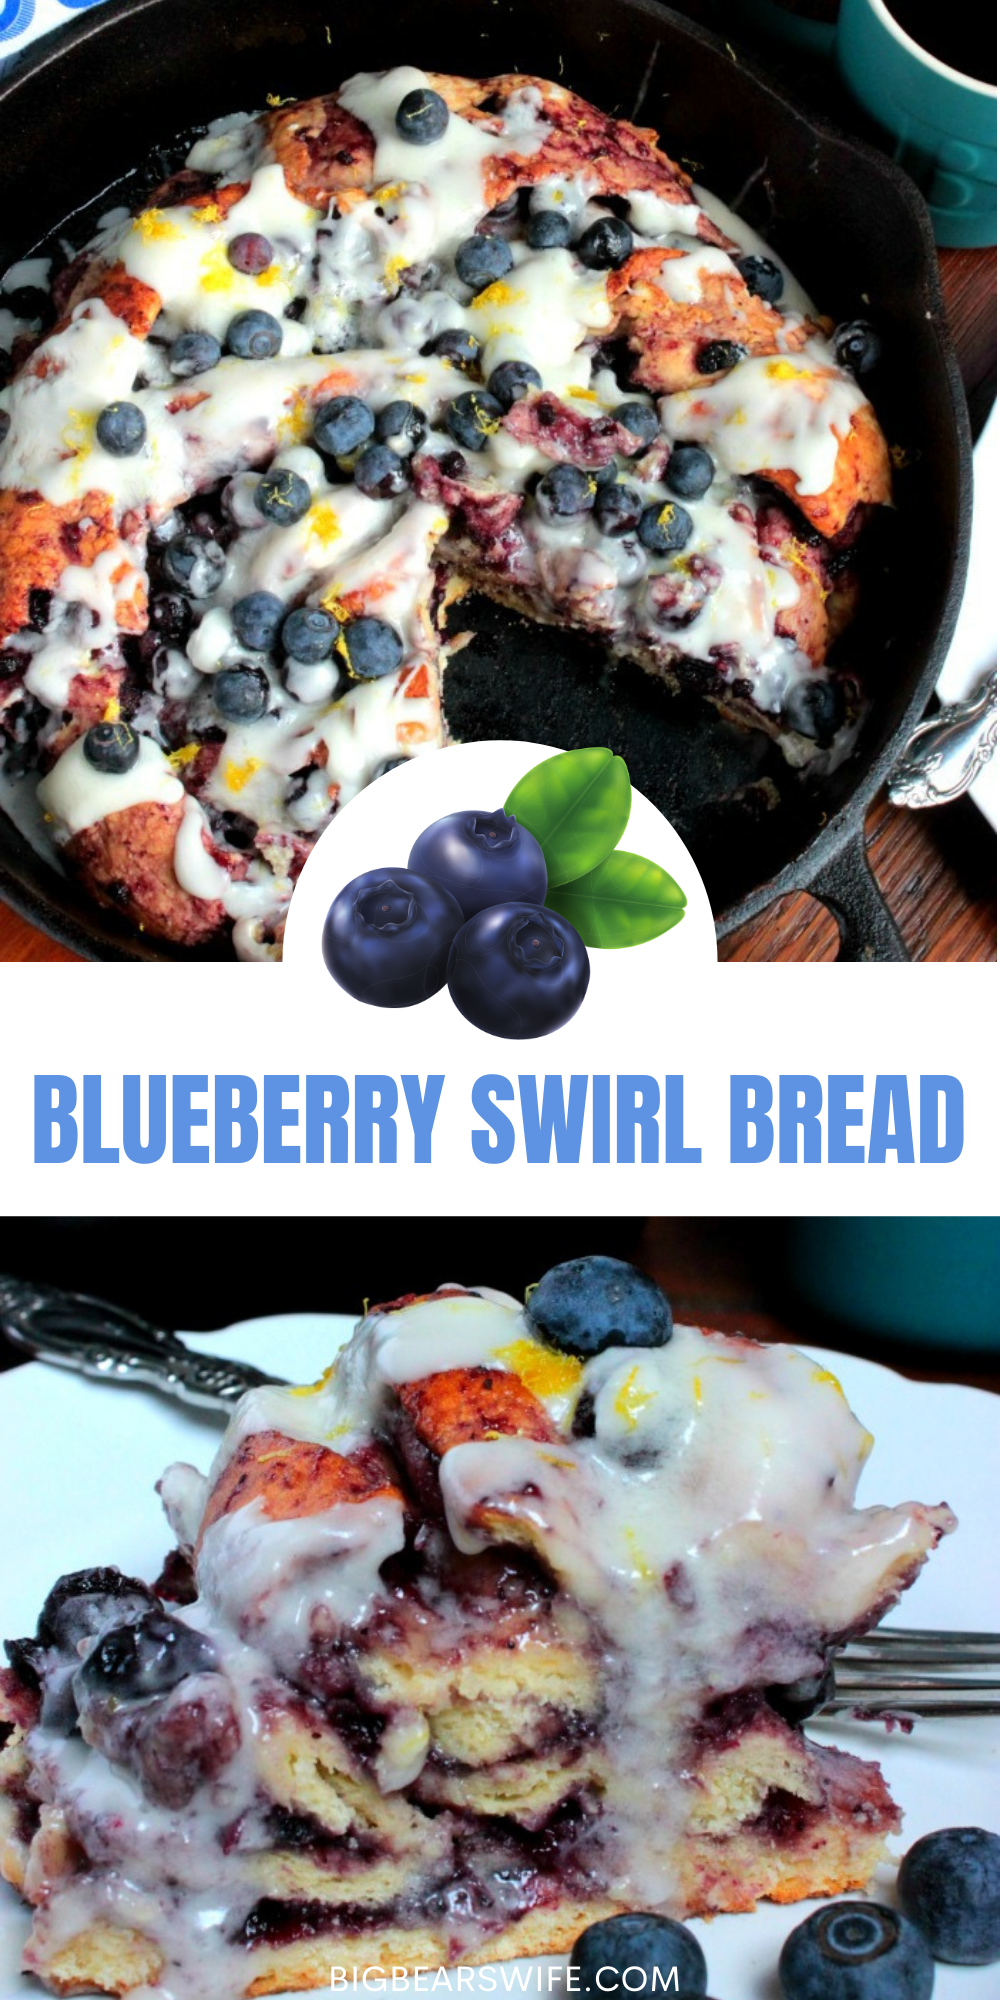  This Blueberry Swirl Bread  is perfect for a weekend breakfast or brunch!! Once you get this bread baked and drizzle on that homemade glaze, you're going to be digging your fork into some of the best blueberry twist bread to come out of your oven. via @bigbearswife